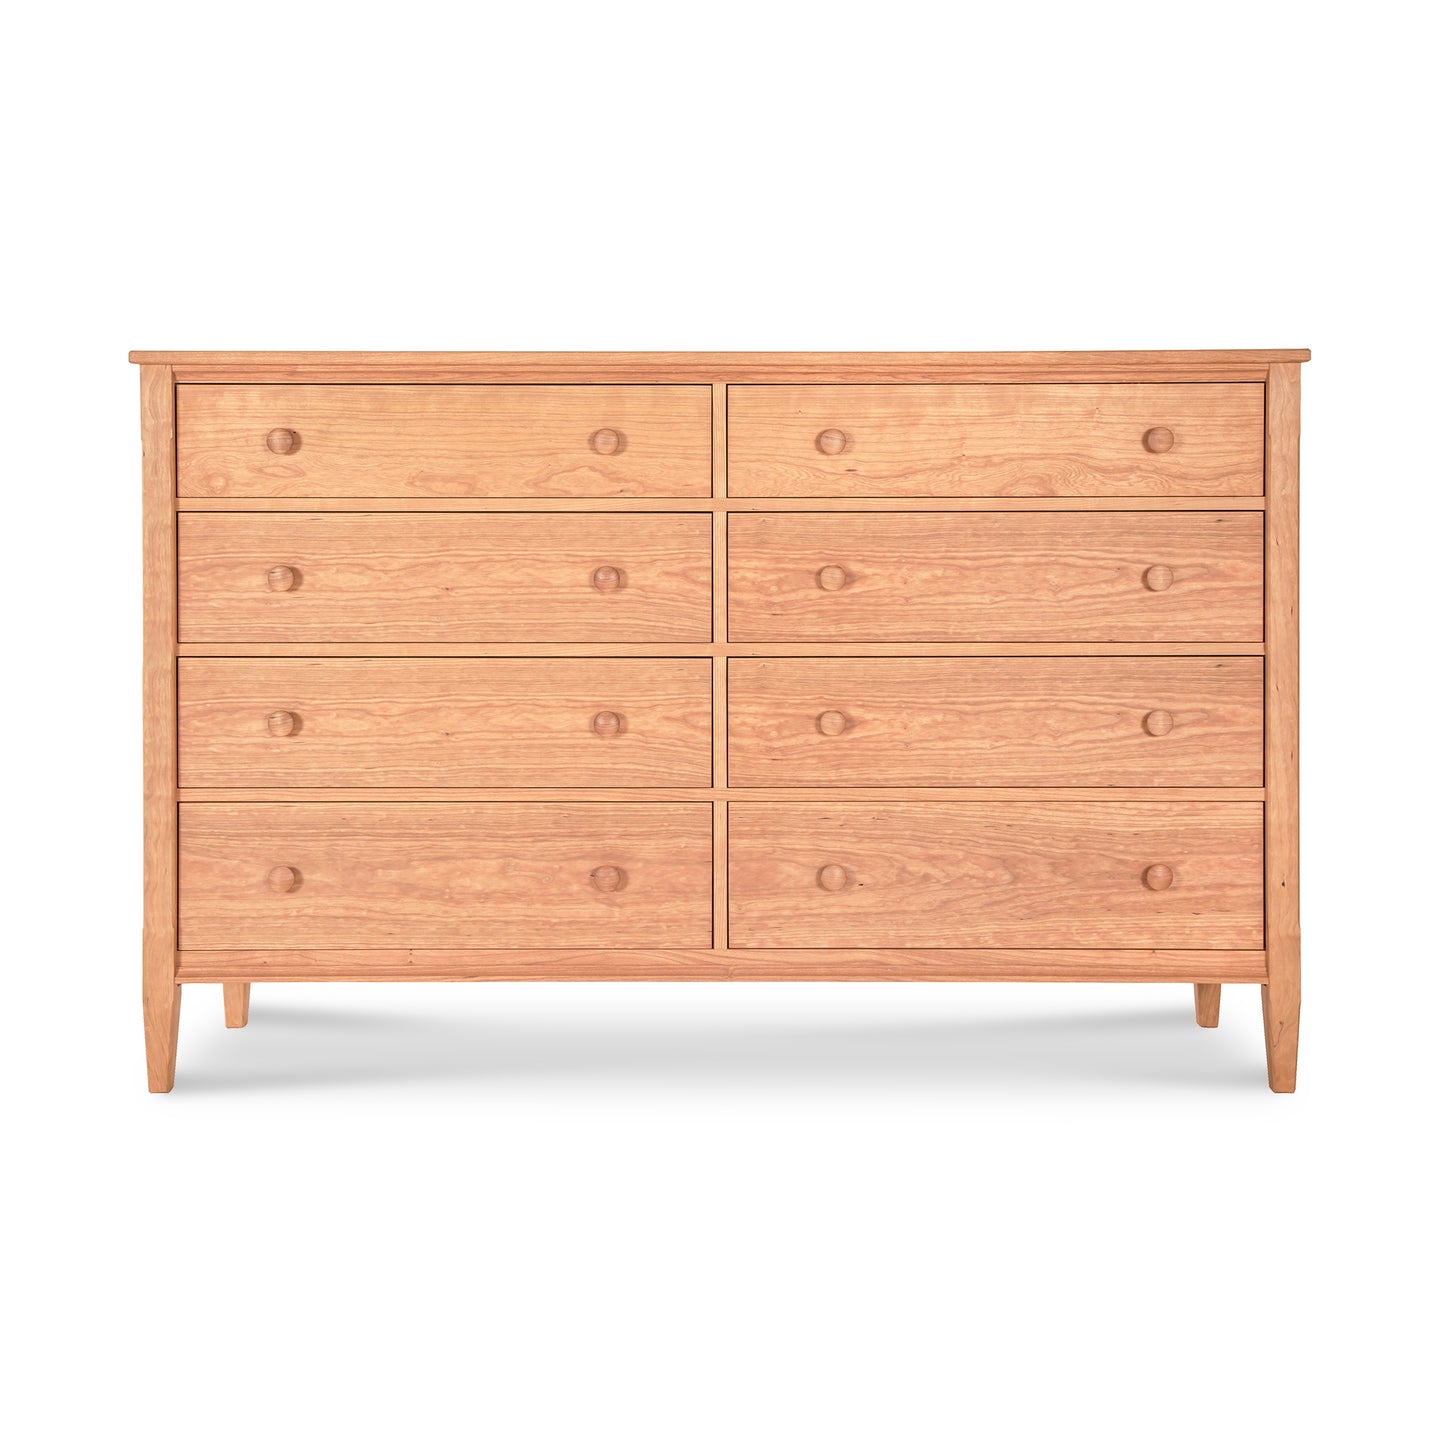 A Vermont Shaker 8-Drawer Dresser from Maple Corner Woodworks, featuring a light brown finish and round knobs. It has two smaller drawers on top of six larger ones, all against a plain white background.